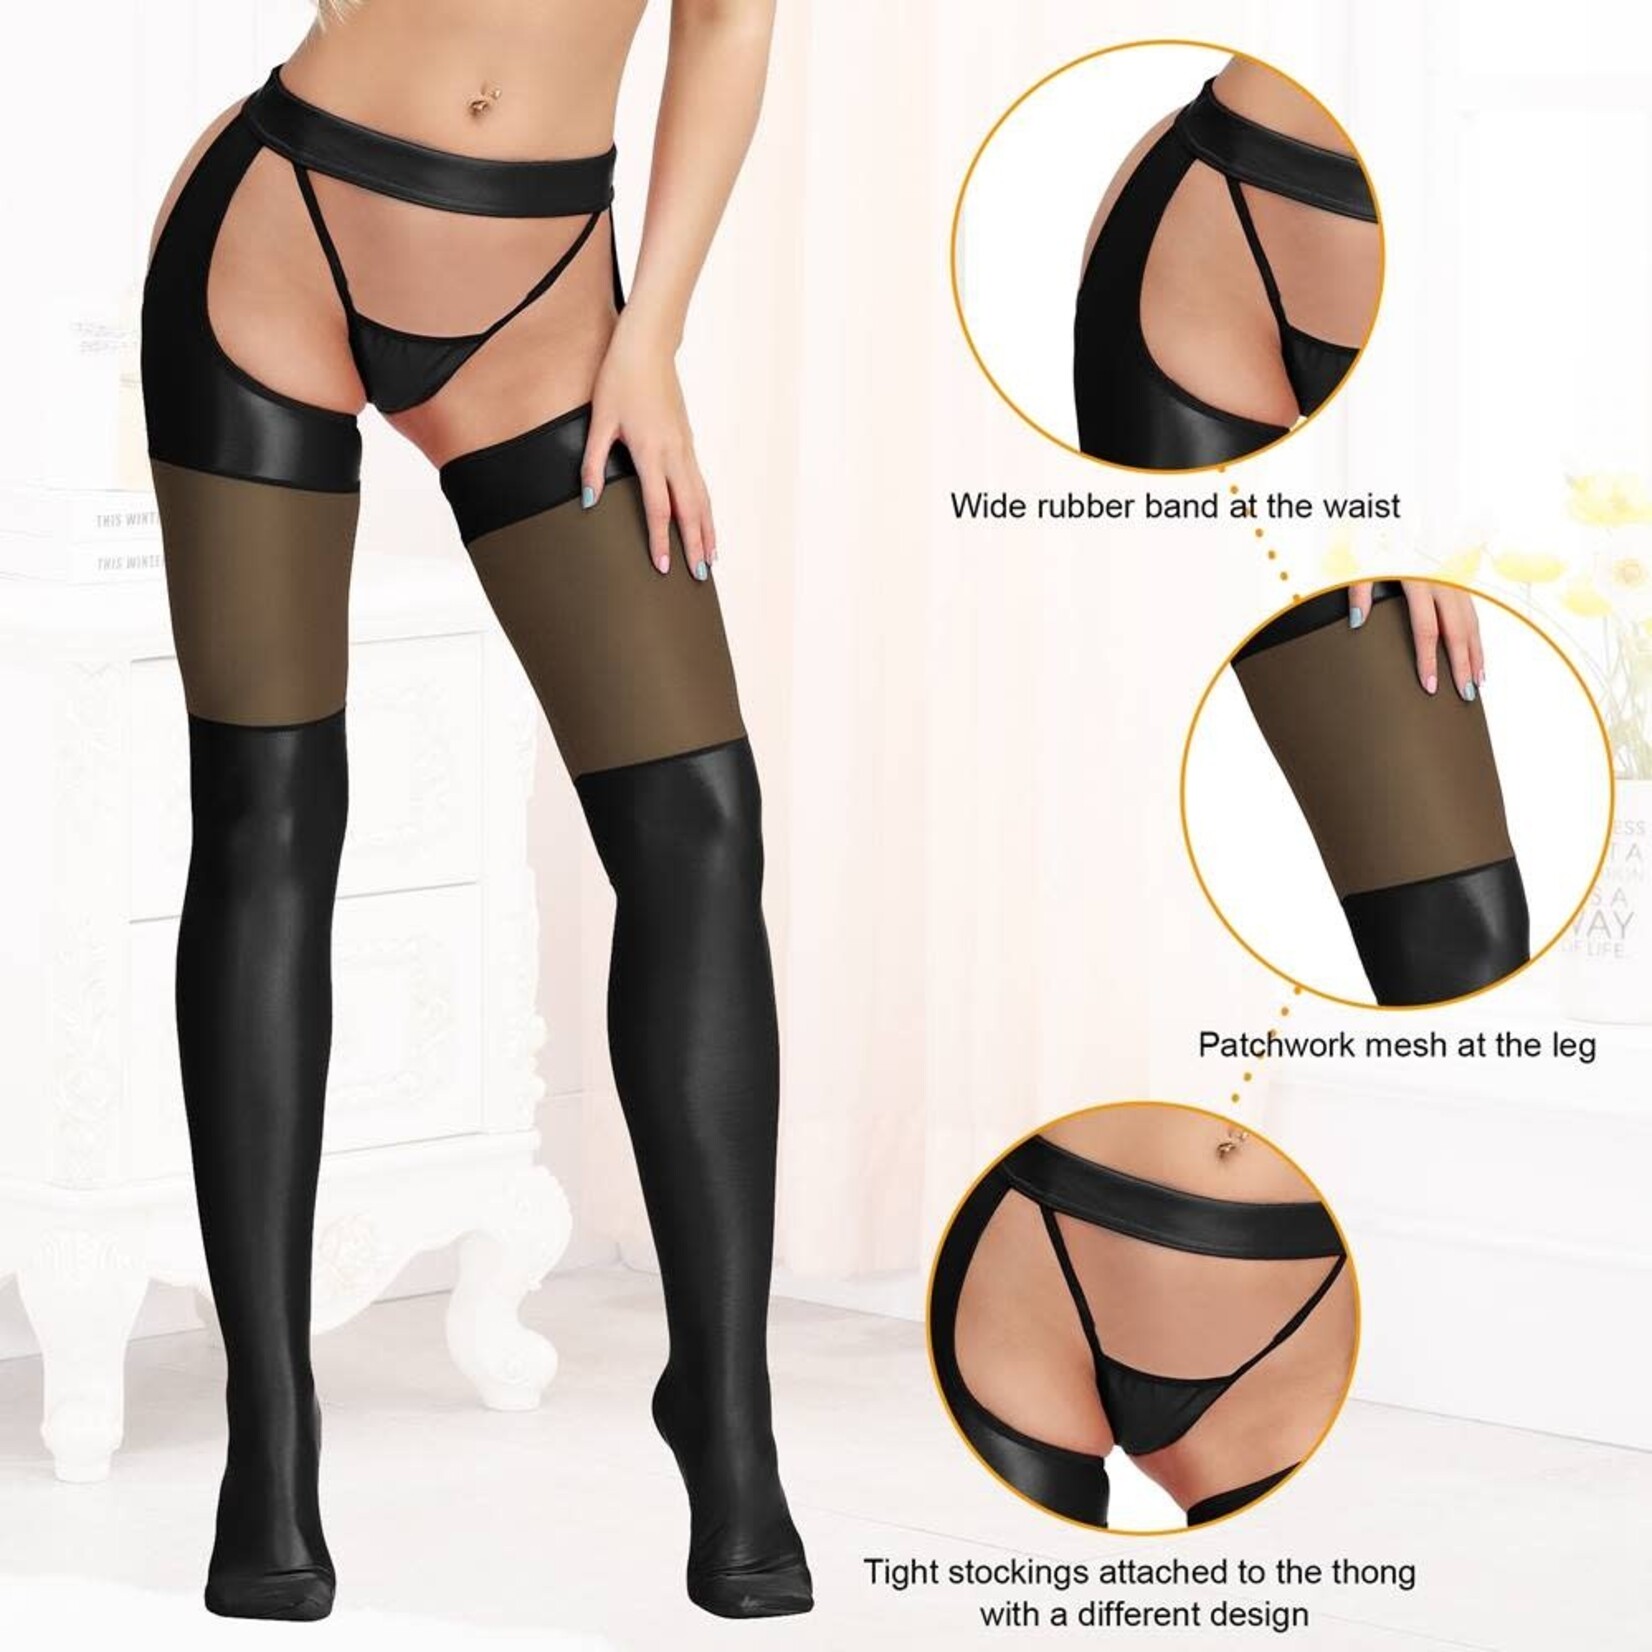 OH YEAH! -  BLACK SEXY FAUX LEATHER STOCKINGS XS-M